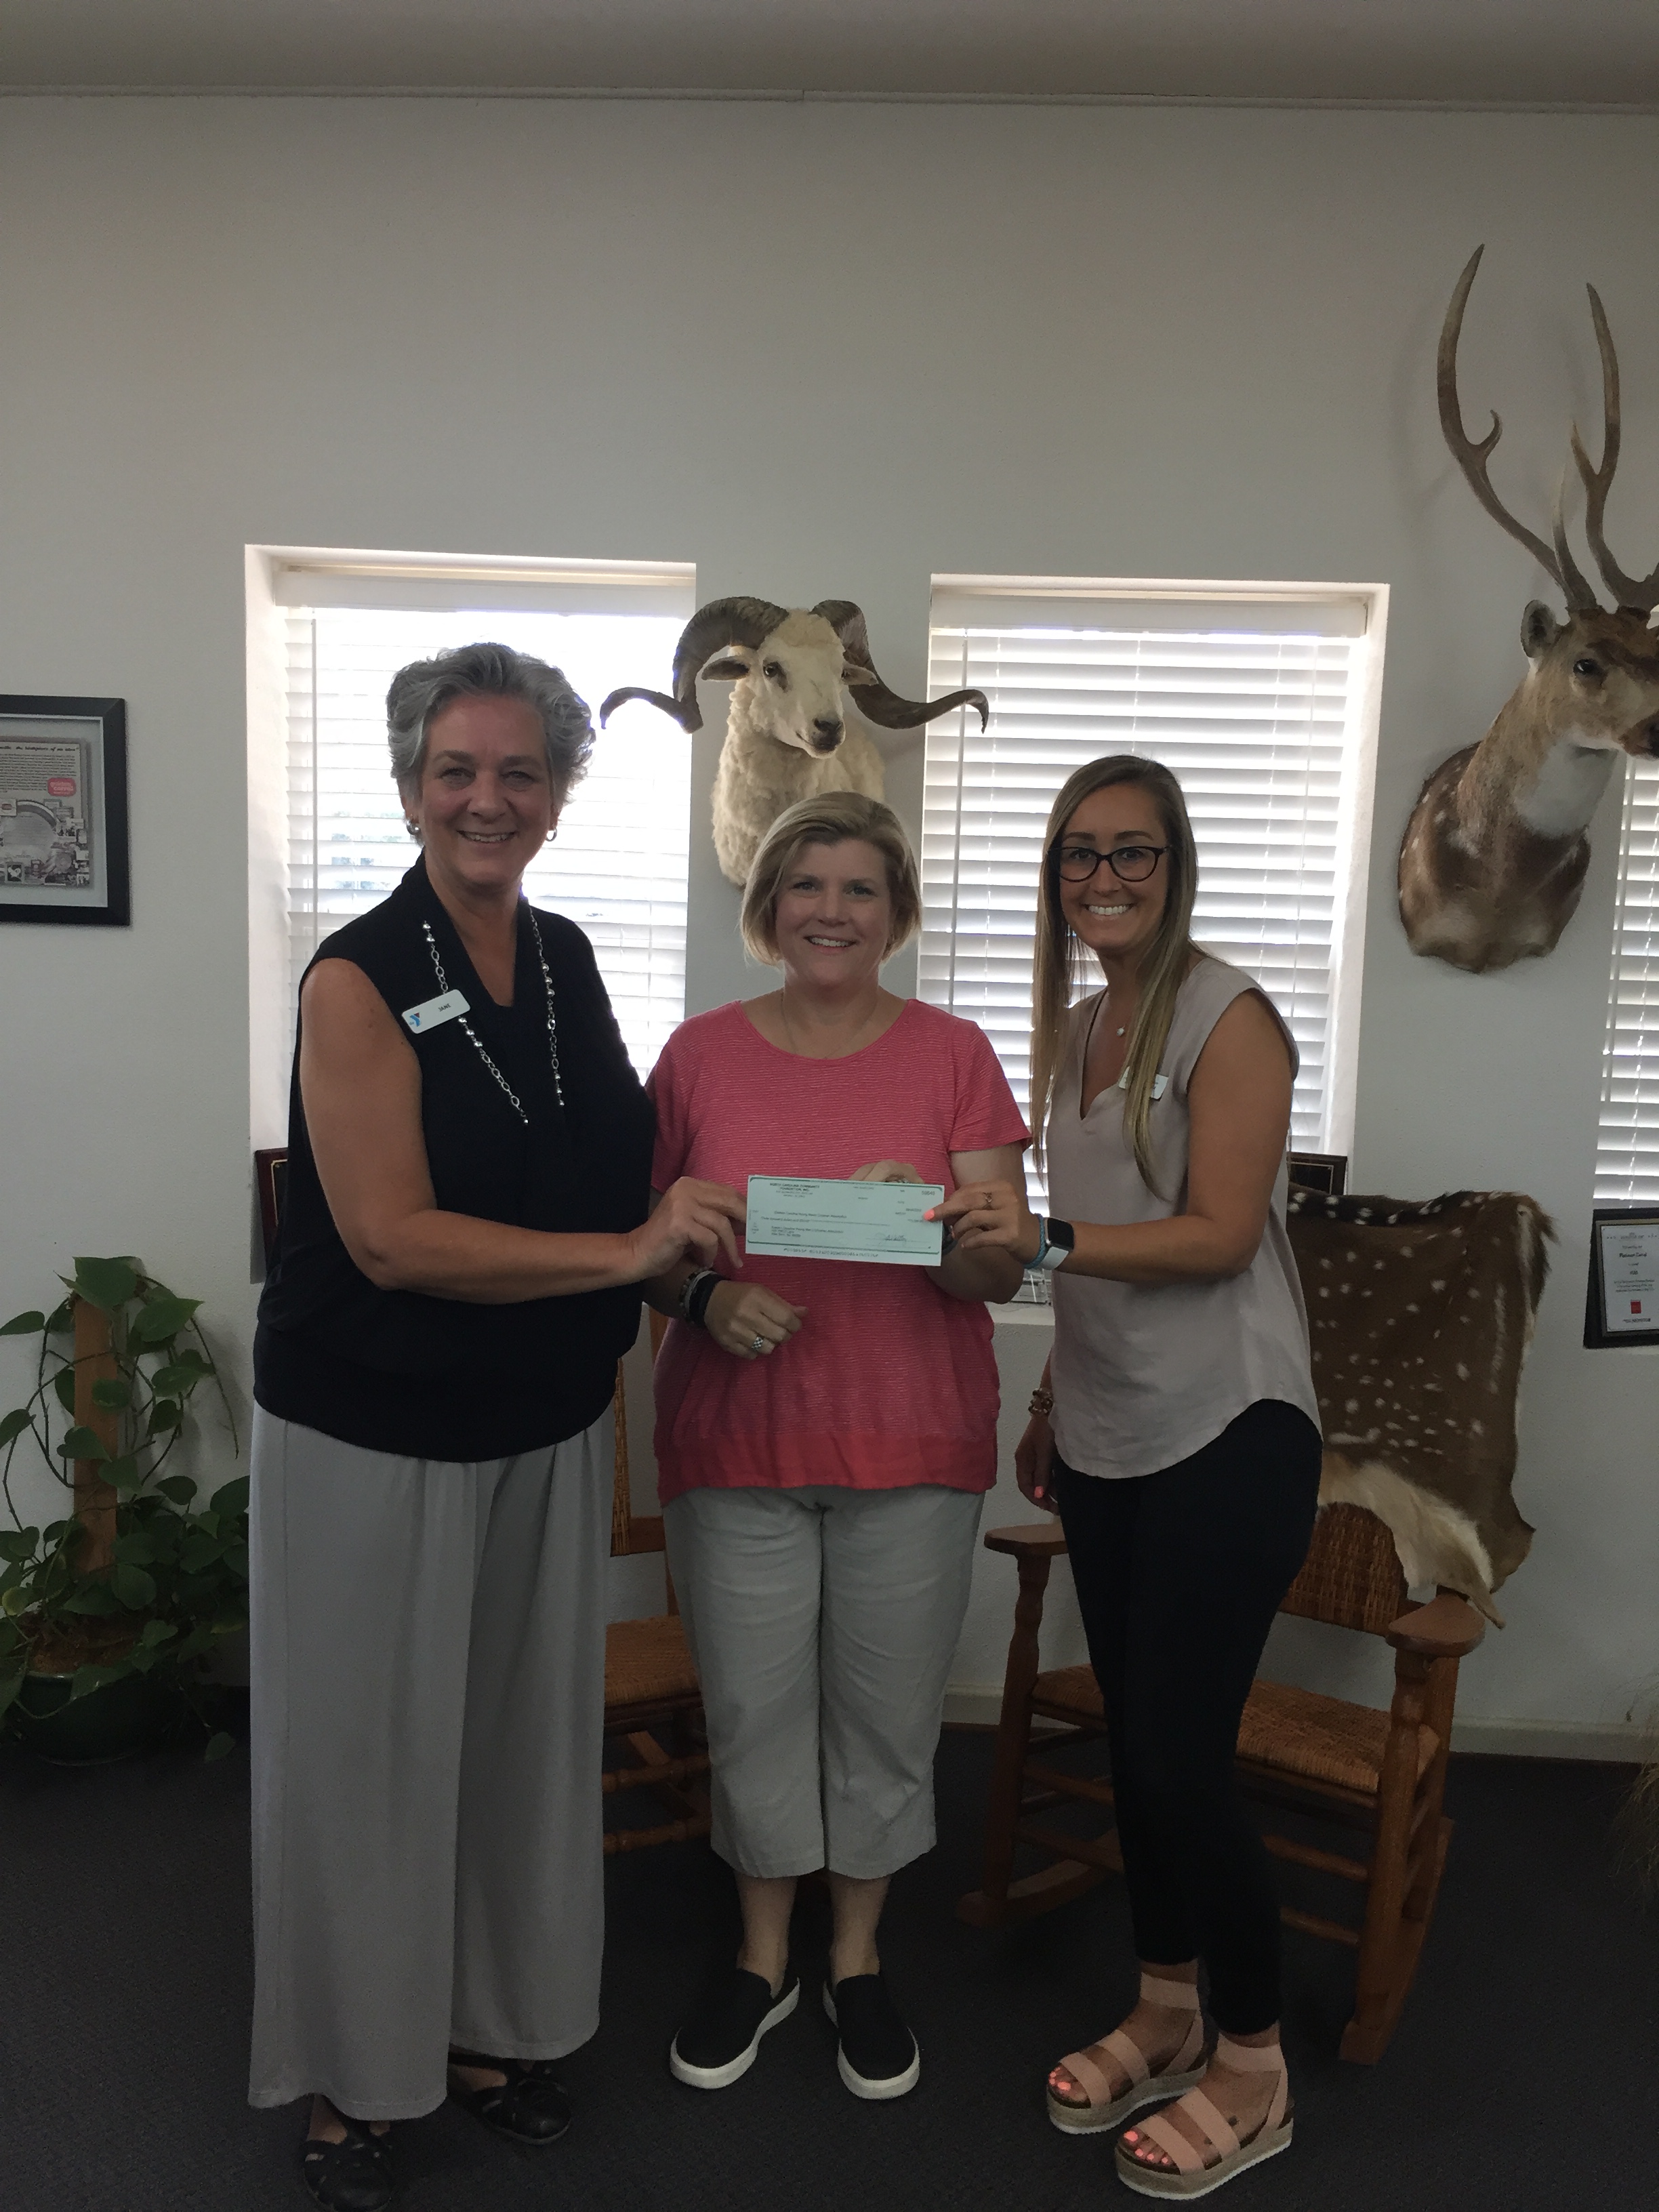 Julee Efird Sewell, Onslow Caring Communities Foundation chair, presenting a $3,000 grant check to New River YMCA Day Camp executive director and Youth & Family Services Director, Jane Schirmer and Marissa Cunningham, respectiely.